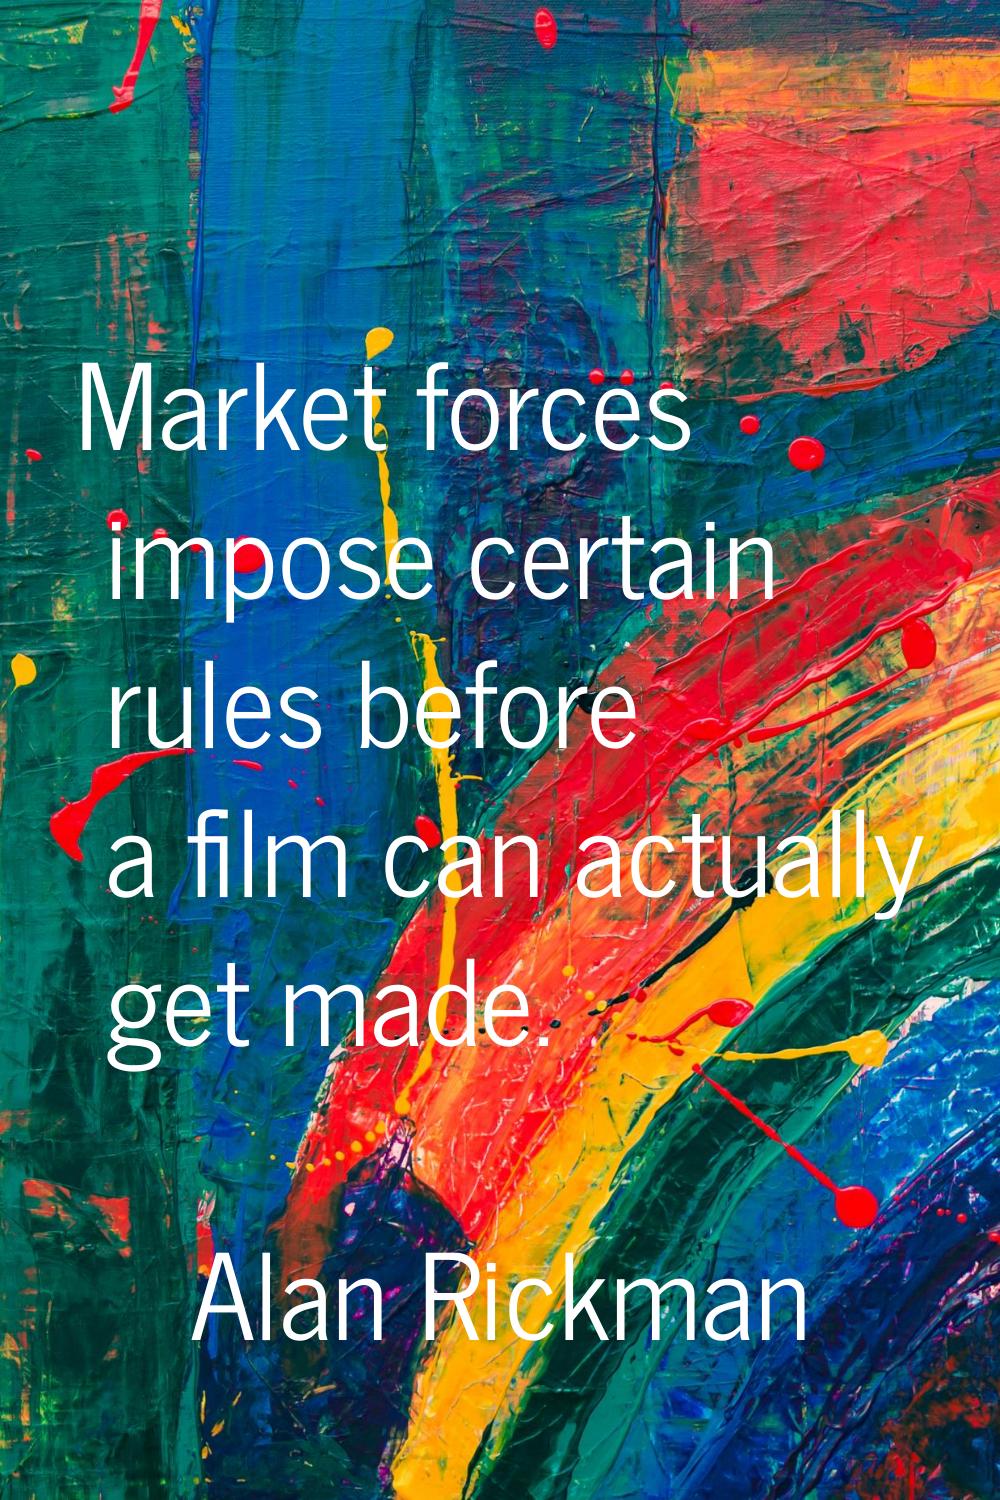 Market forces impose certain rules before a film can actually get made.